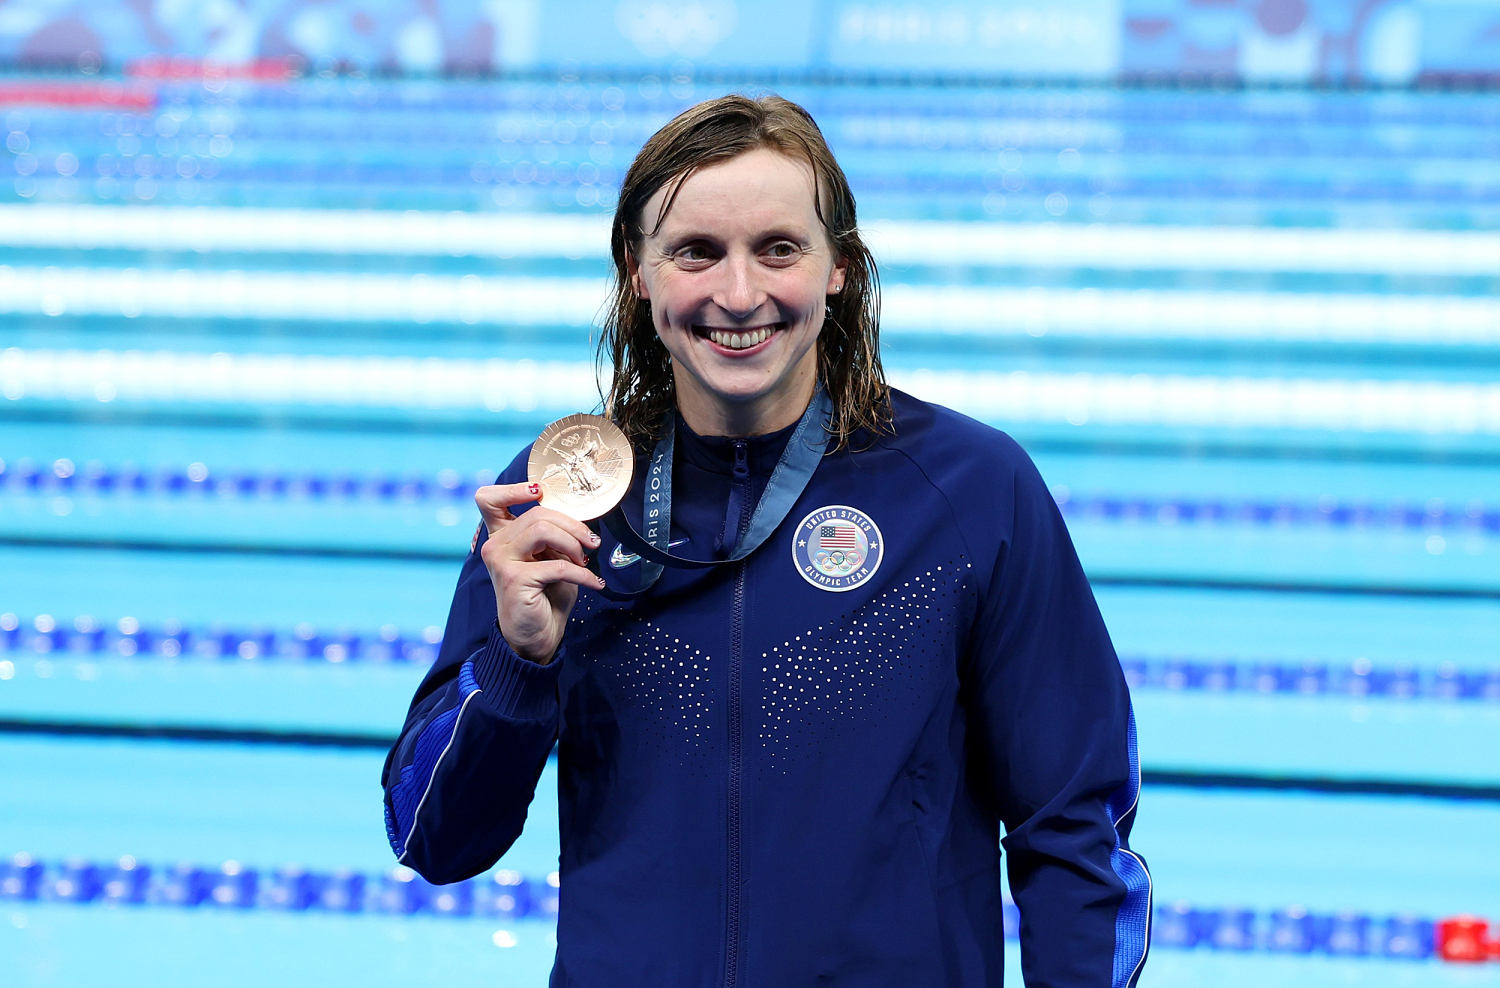 Katie Ledecky wins 1,500 free, tying three other all-time U.S. greats with 12 medals